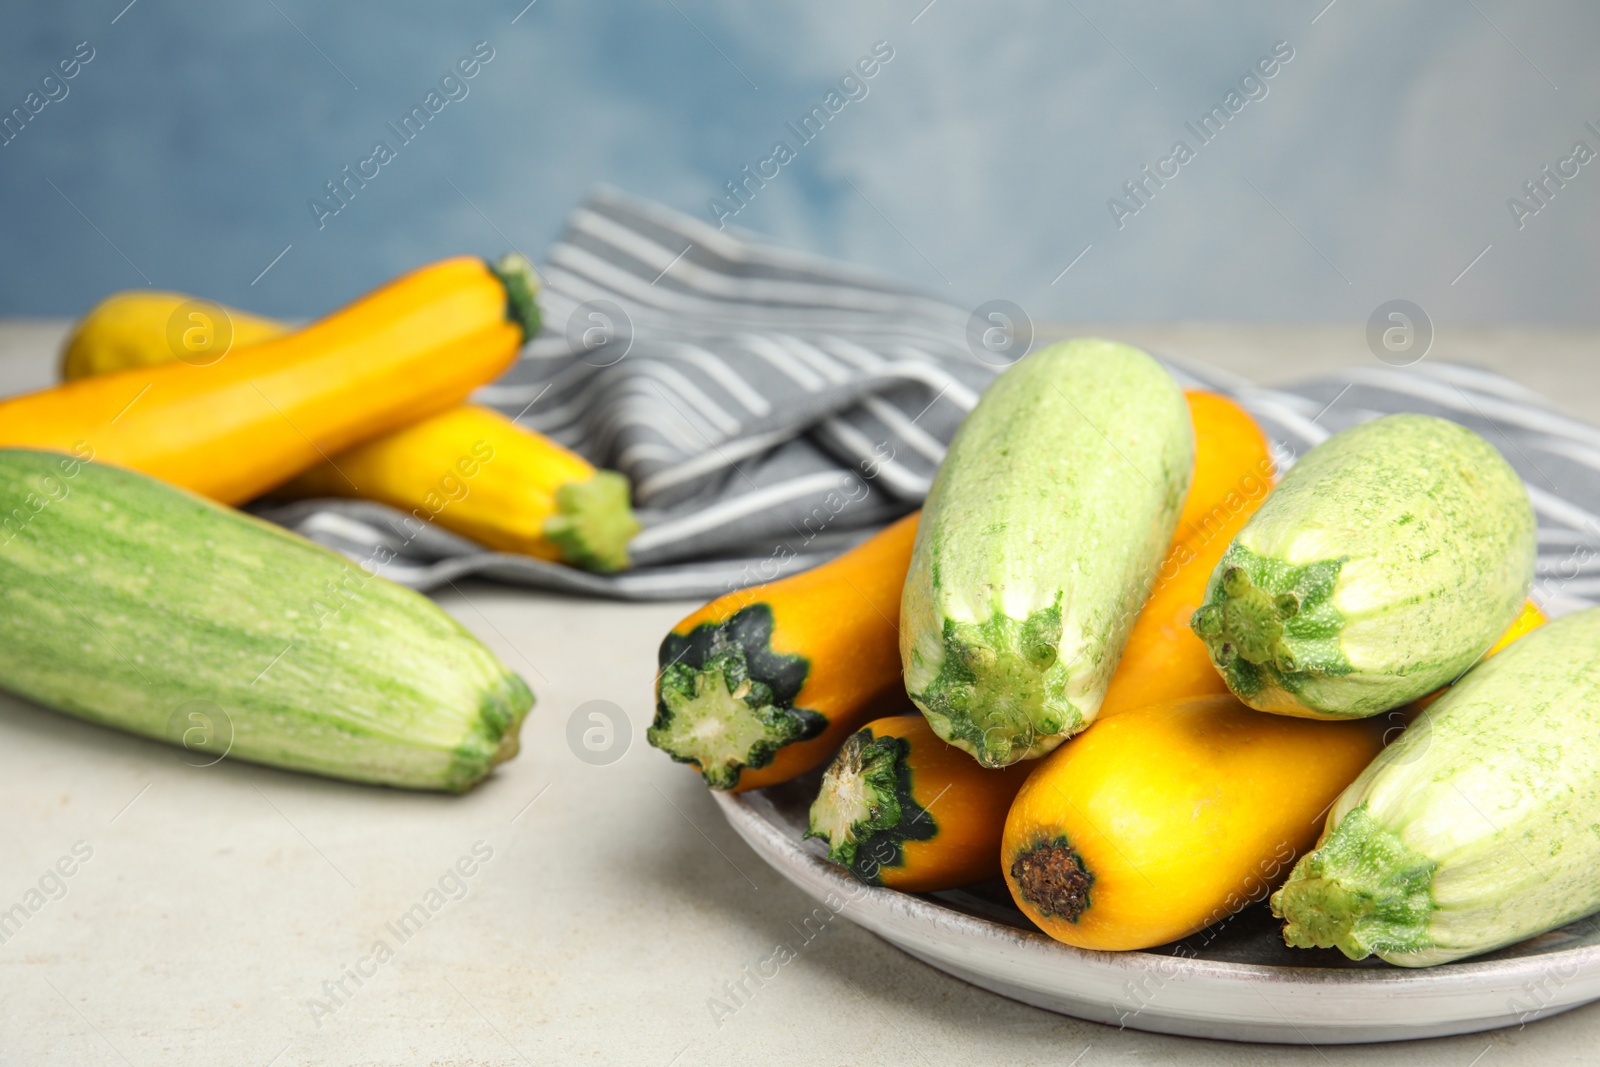 Photo of Plate with fresh ripe zucchinis on light table against blue background, space for text